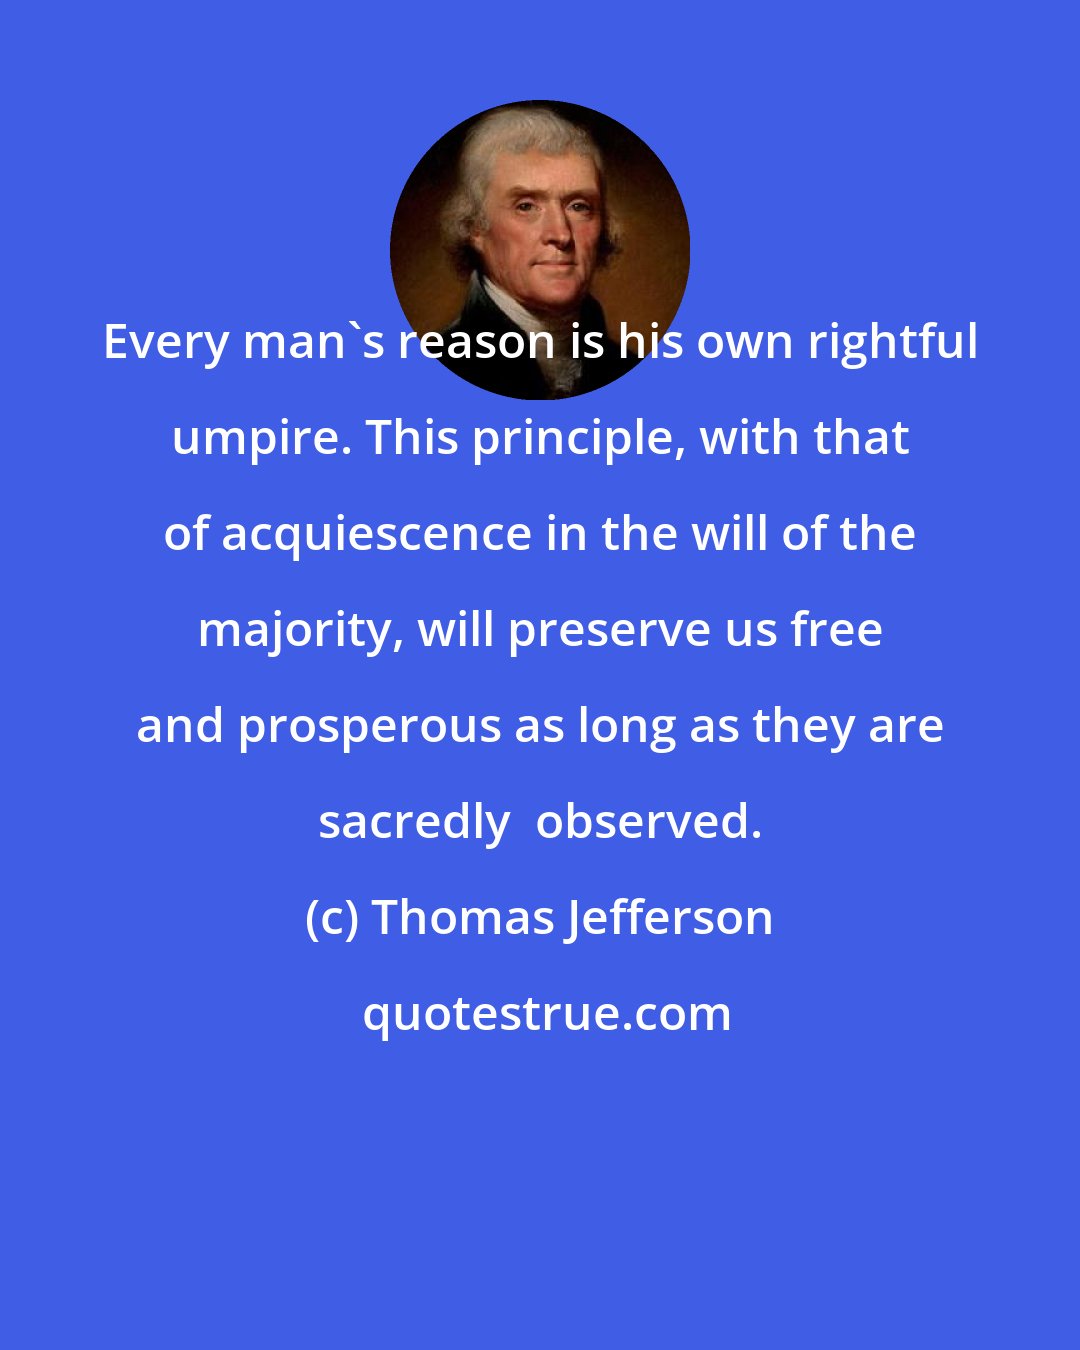 Thomas Jefferson: Every man's reason is his own rightful umpire. This principle, with that of acquiescence in the will of the majority, will preserve us free and prosperous as long as they are sacredly  observed.